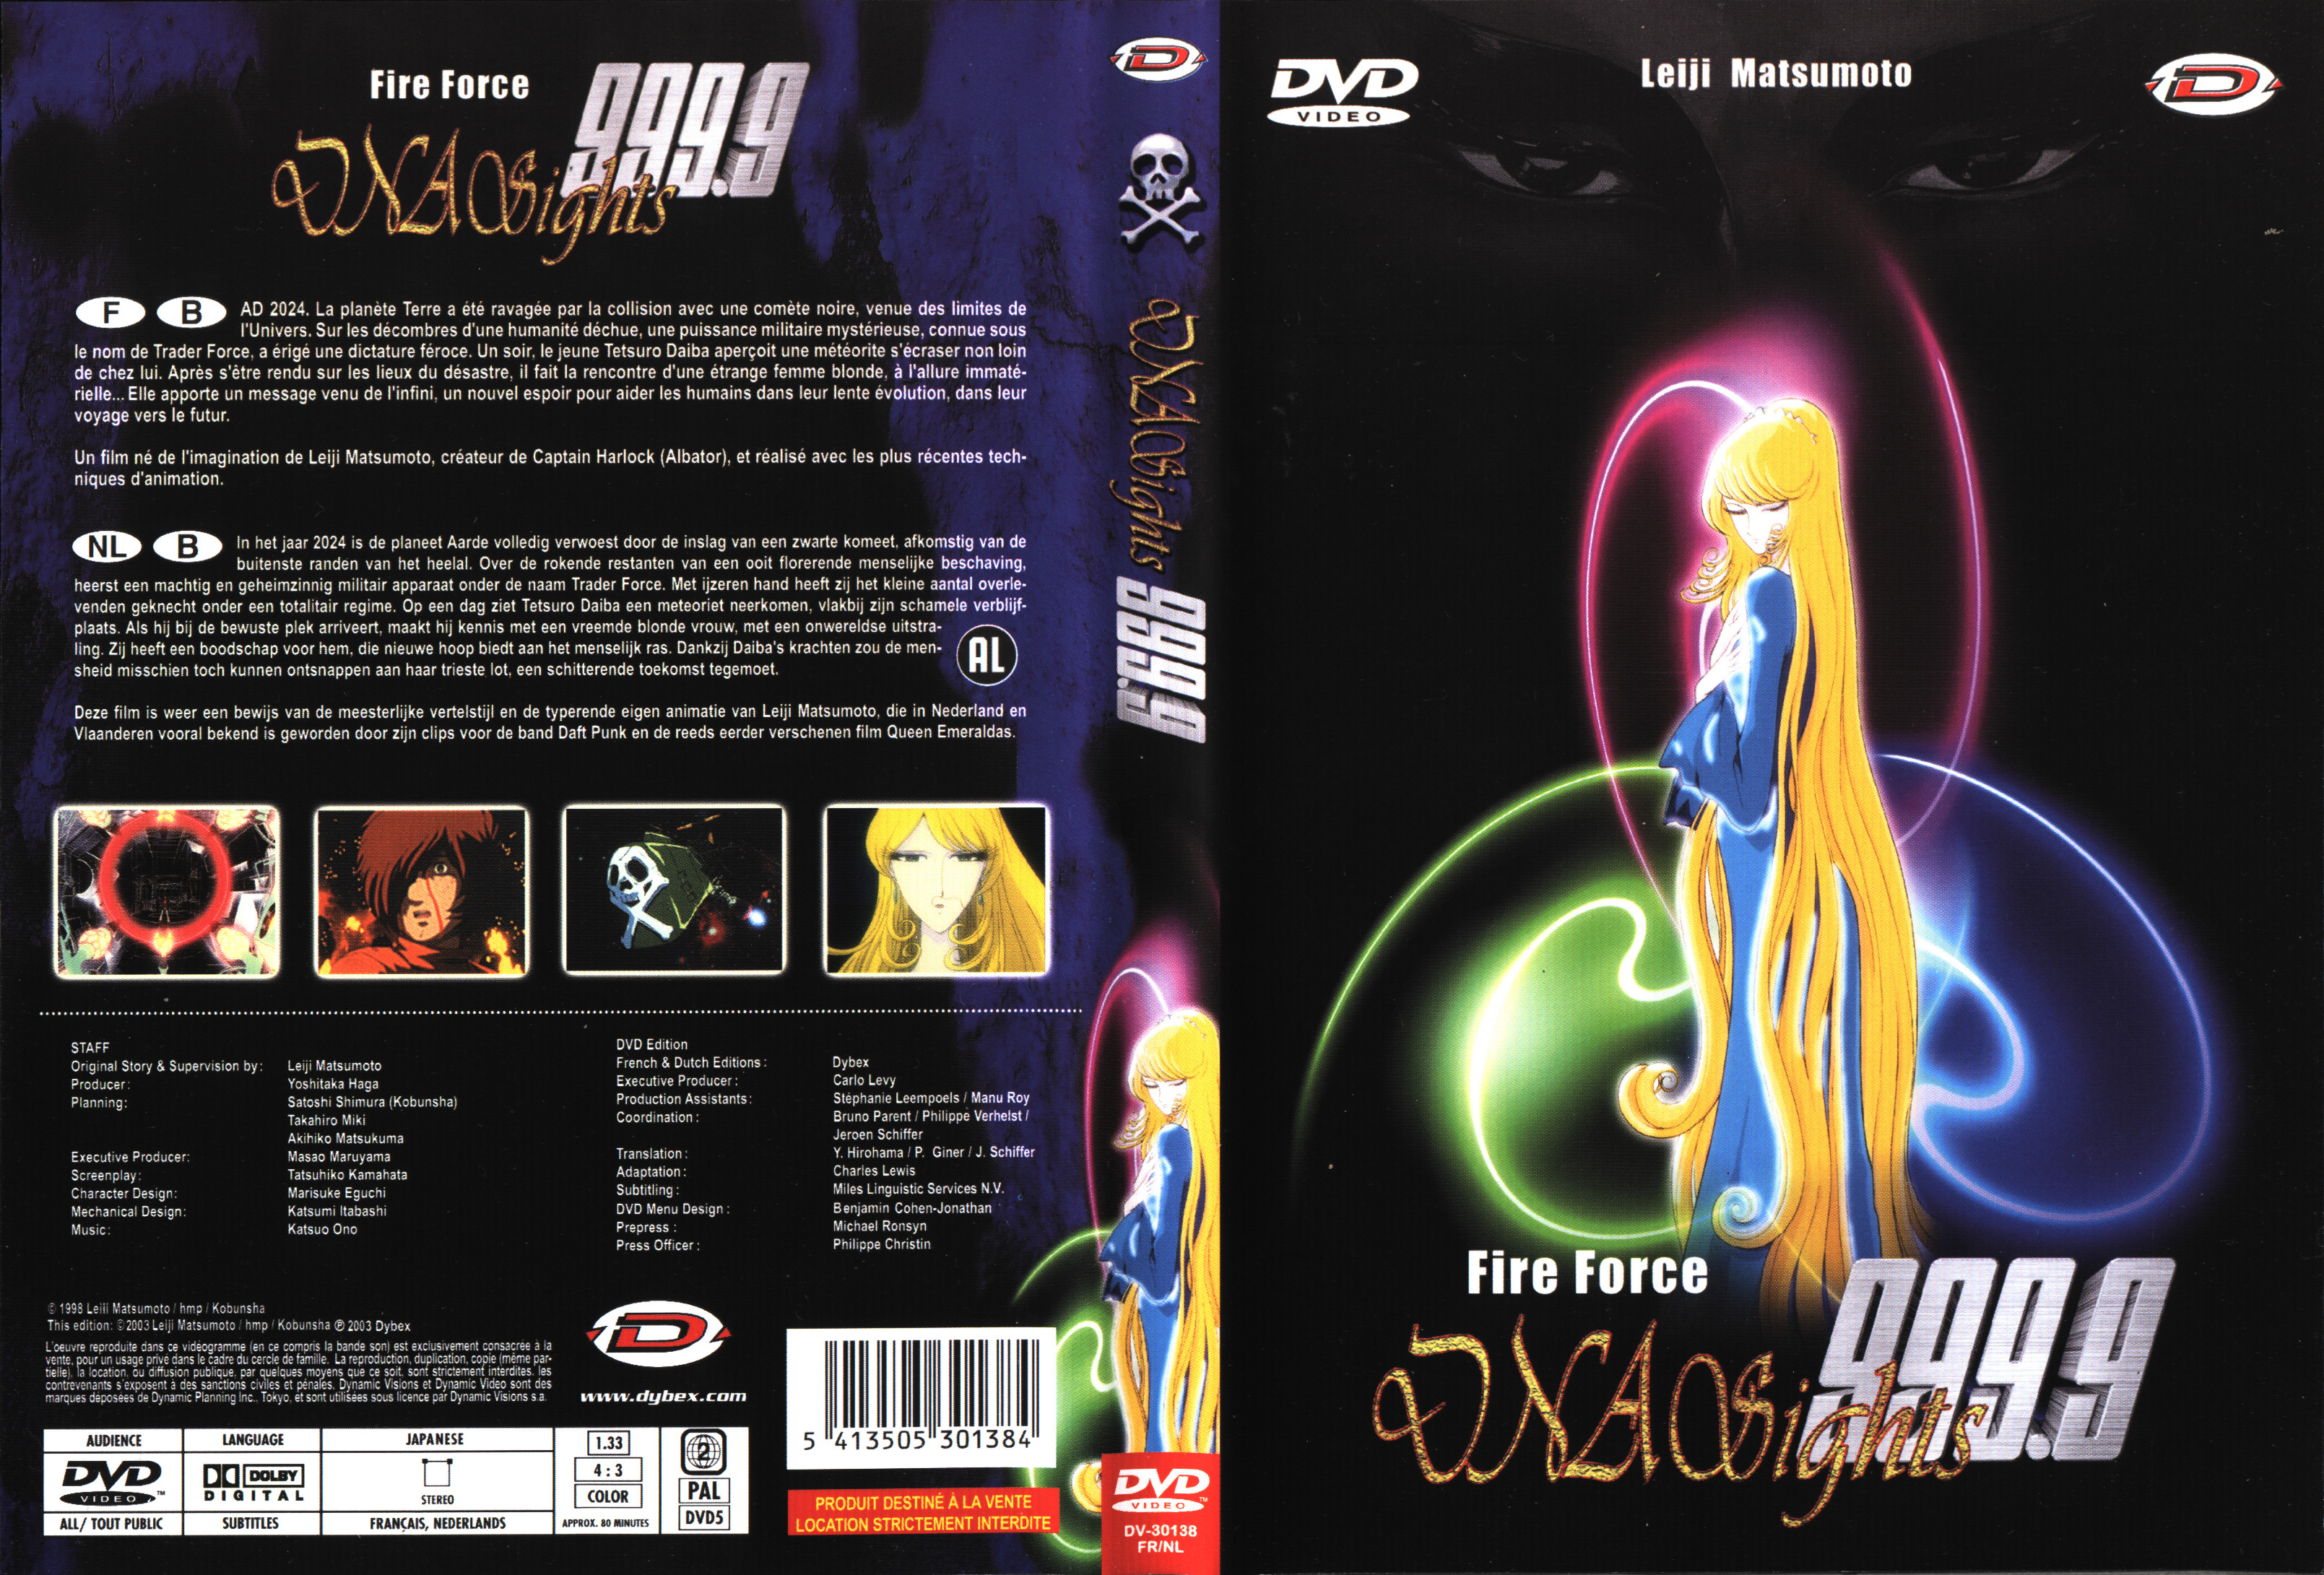 Jaquette DVD DNA sights 999.9